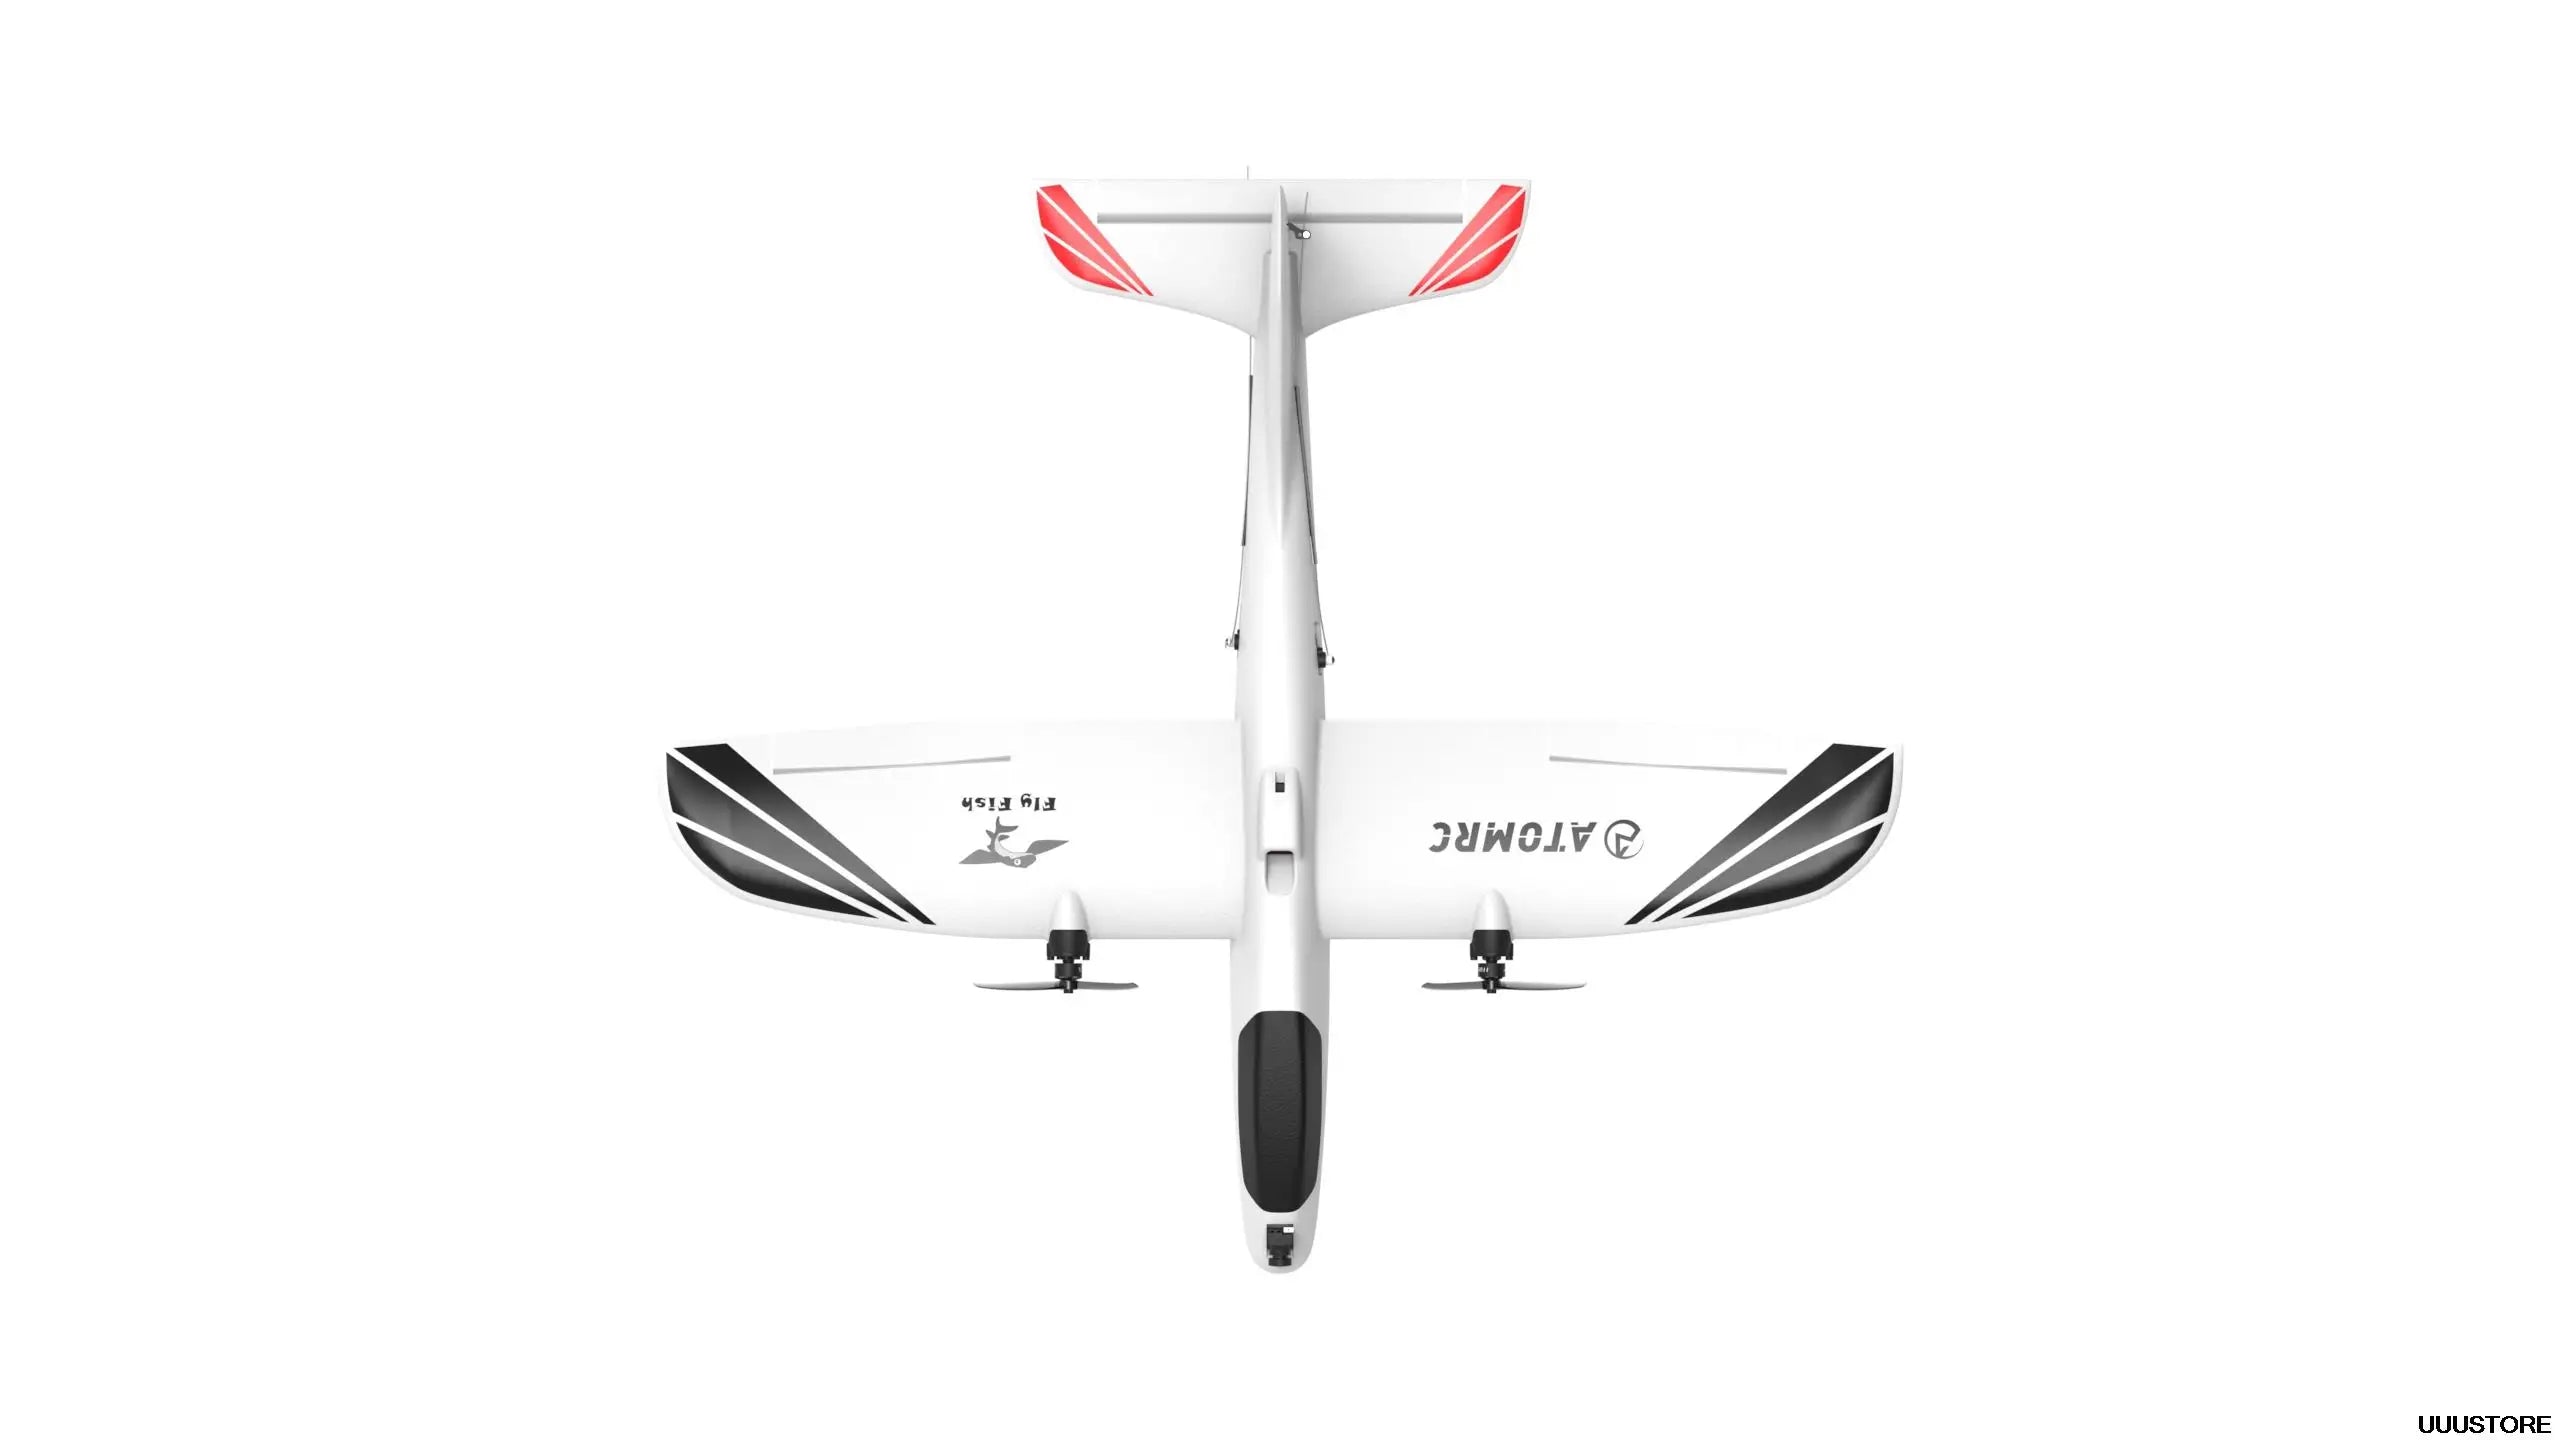 ATOMRC Flying Fish, package includes: 1 x Pre-build plane 1x ATOMRC Exceed 2in